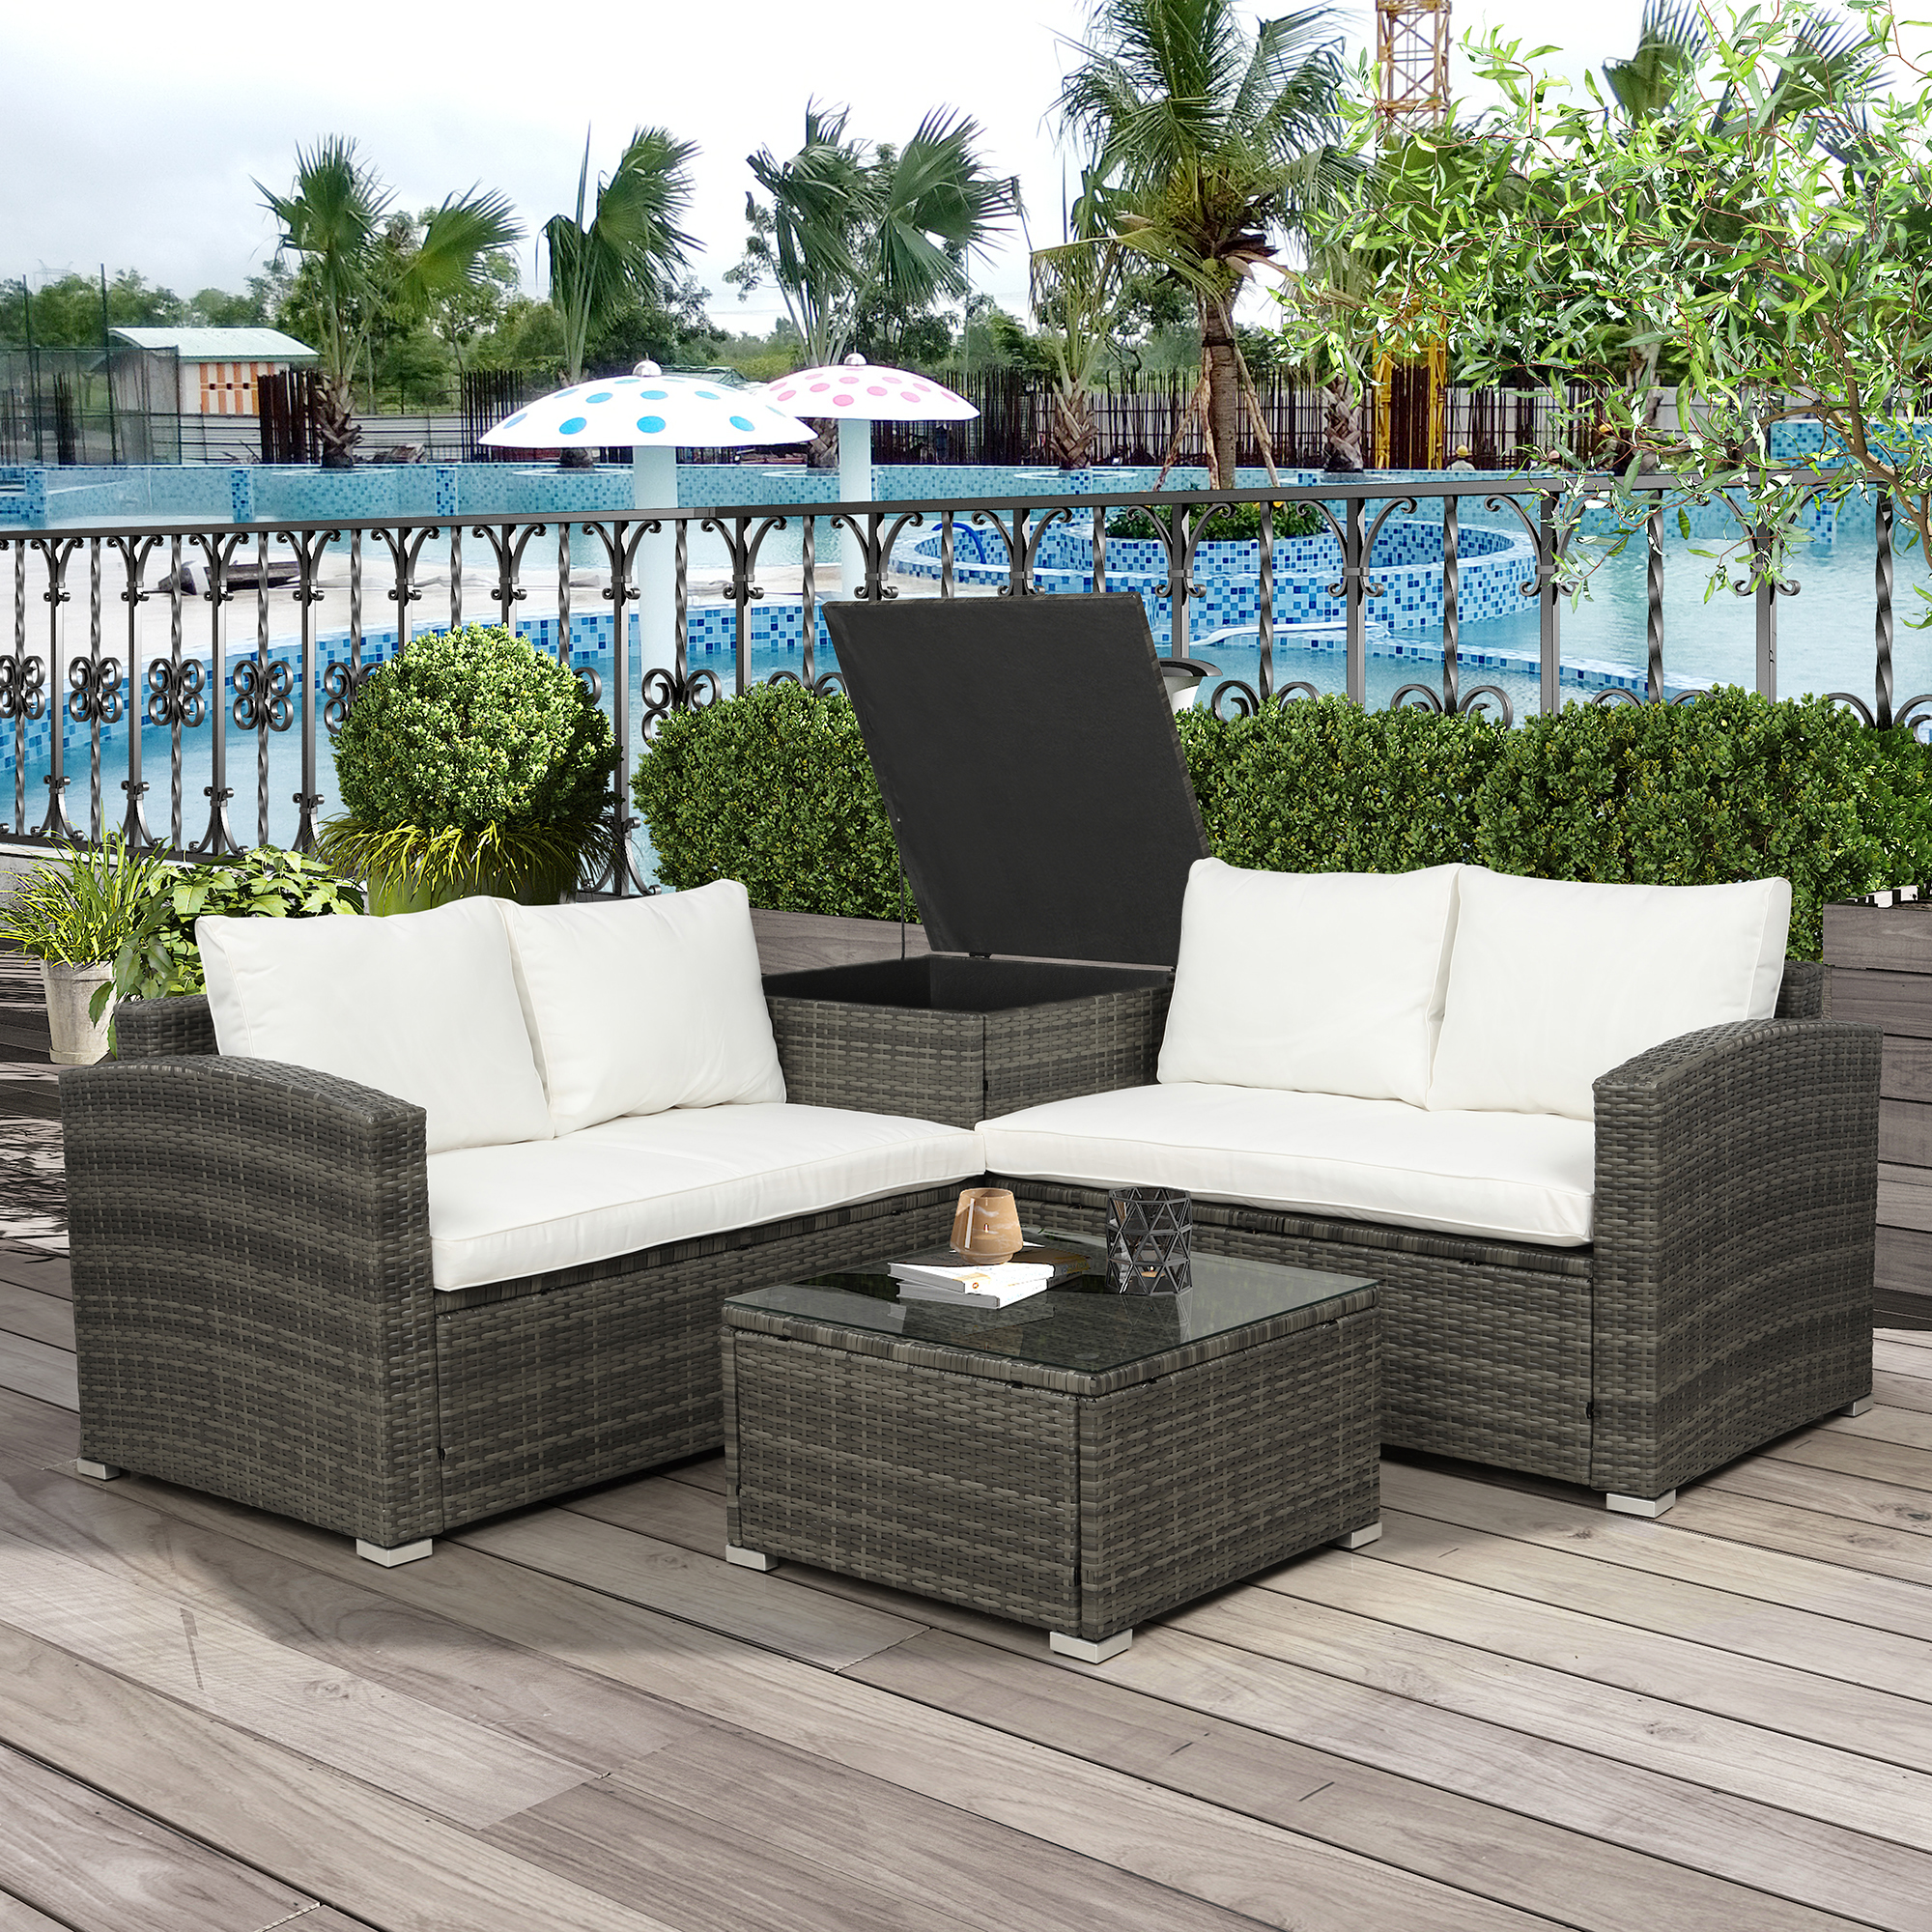 Outdoor Patio Furniture Set, Rattan Chairs & Seating Sets for Backyard, 4-Piece Wicker Conversation Set w/L-Seats Sofa, R-Seats Sofa, Cushion box, Tempered Glass Dining Table, Padded Cushions, S13116 - image 4 of 8